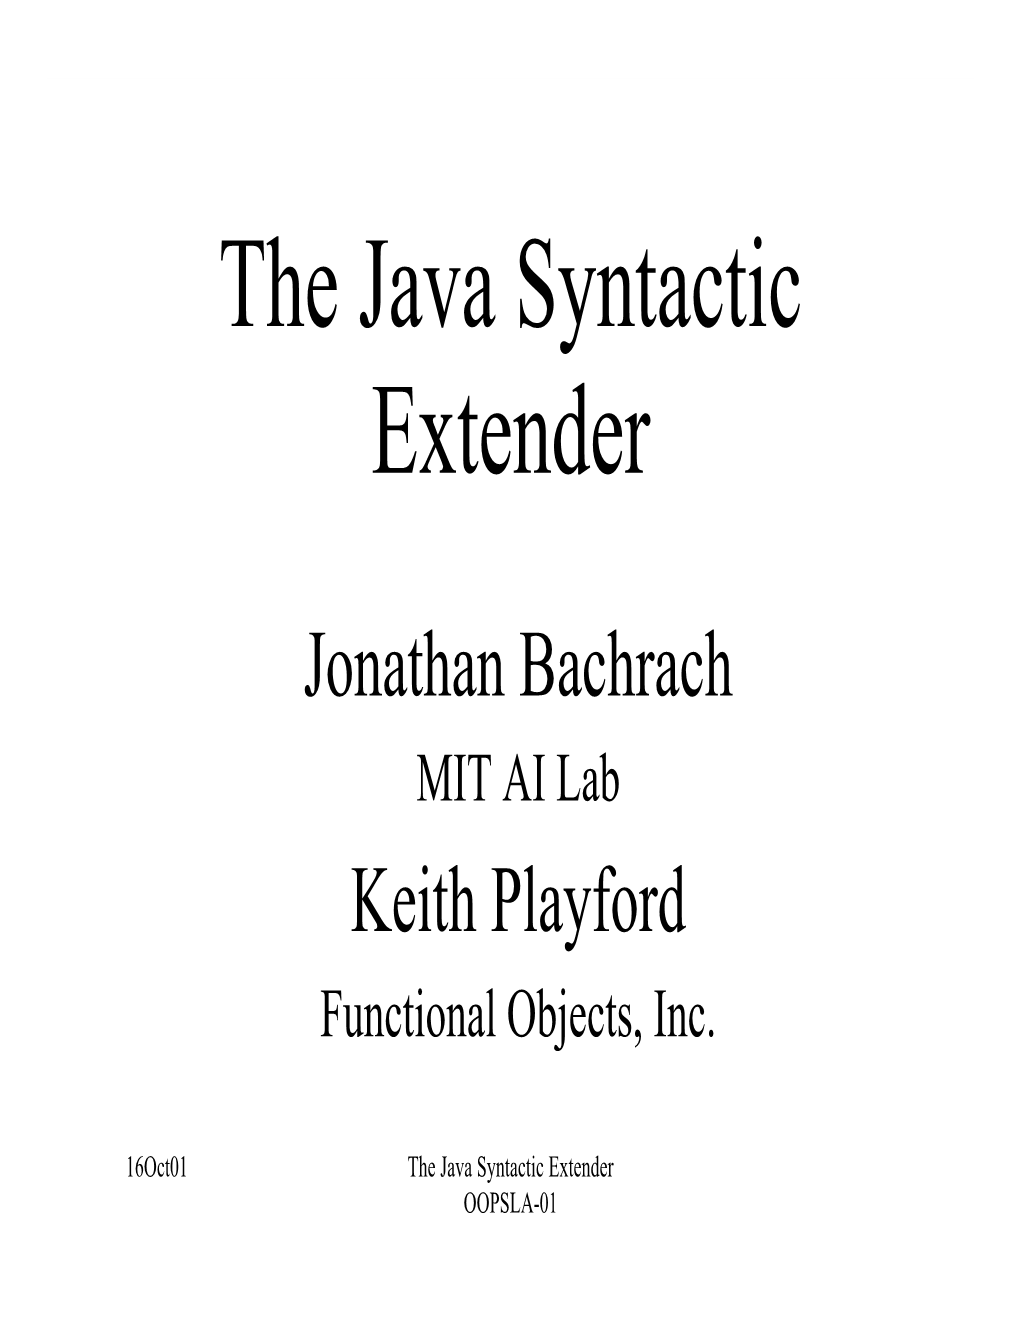 The Java Syntactic Extender